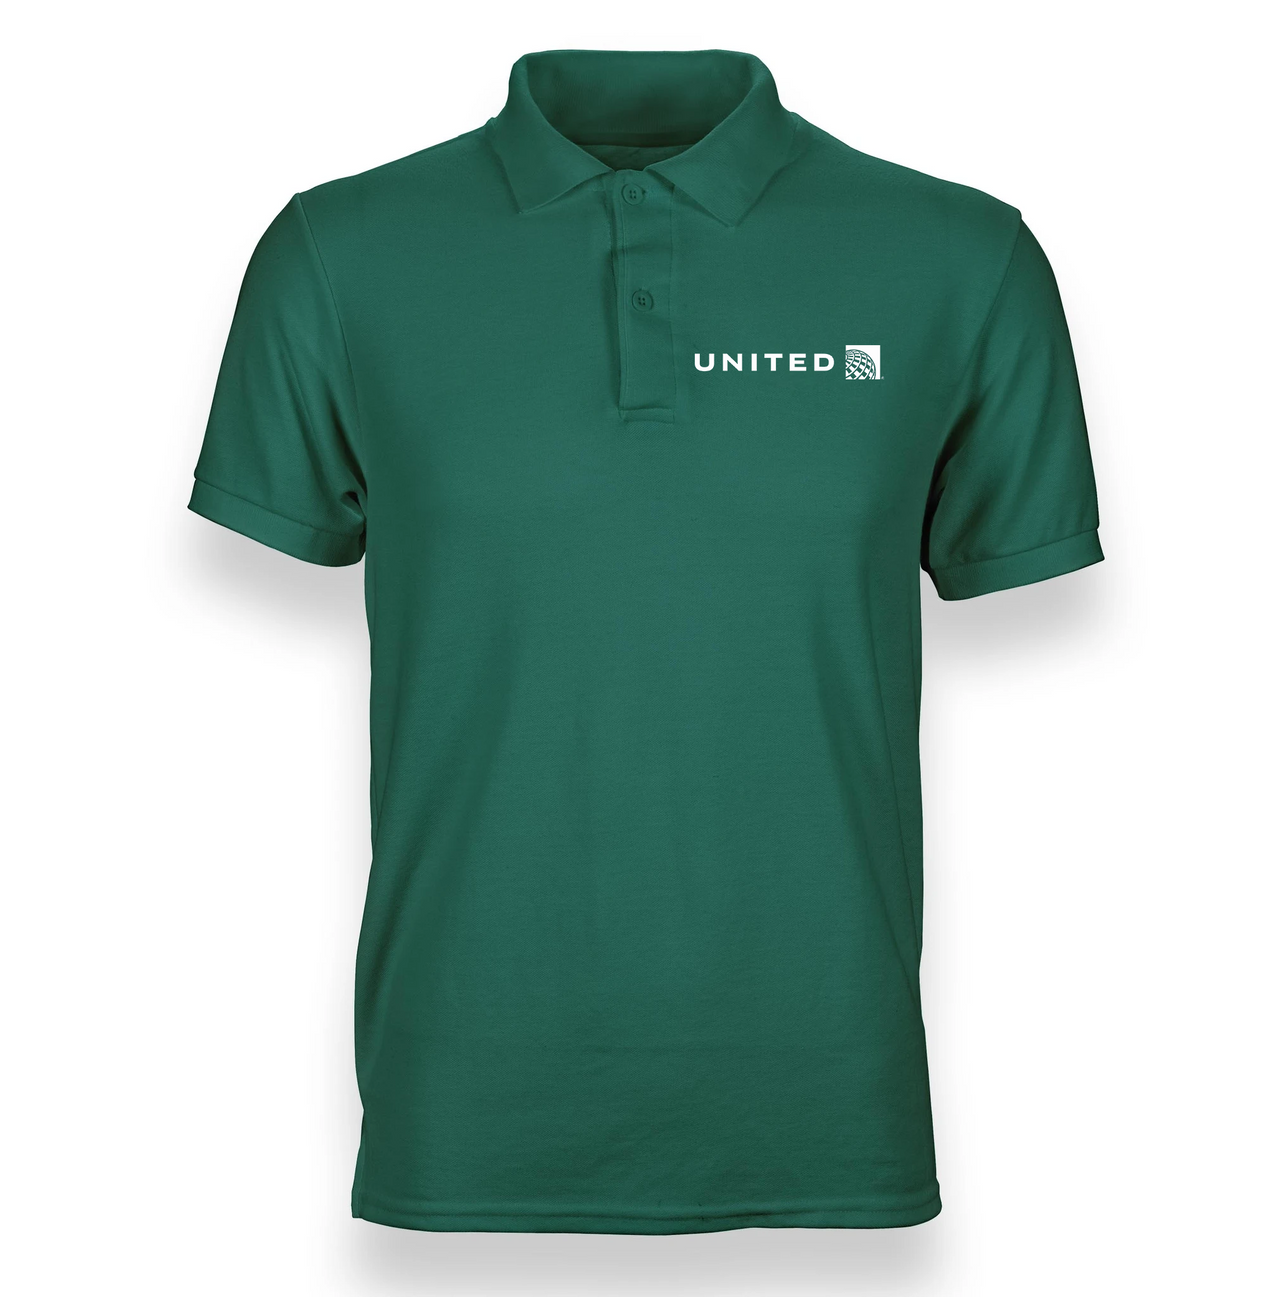 UNITED AIRLINES POLO T-SHIRT